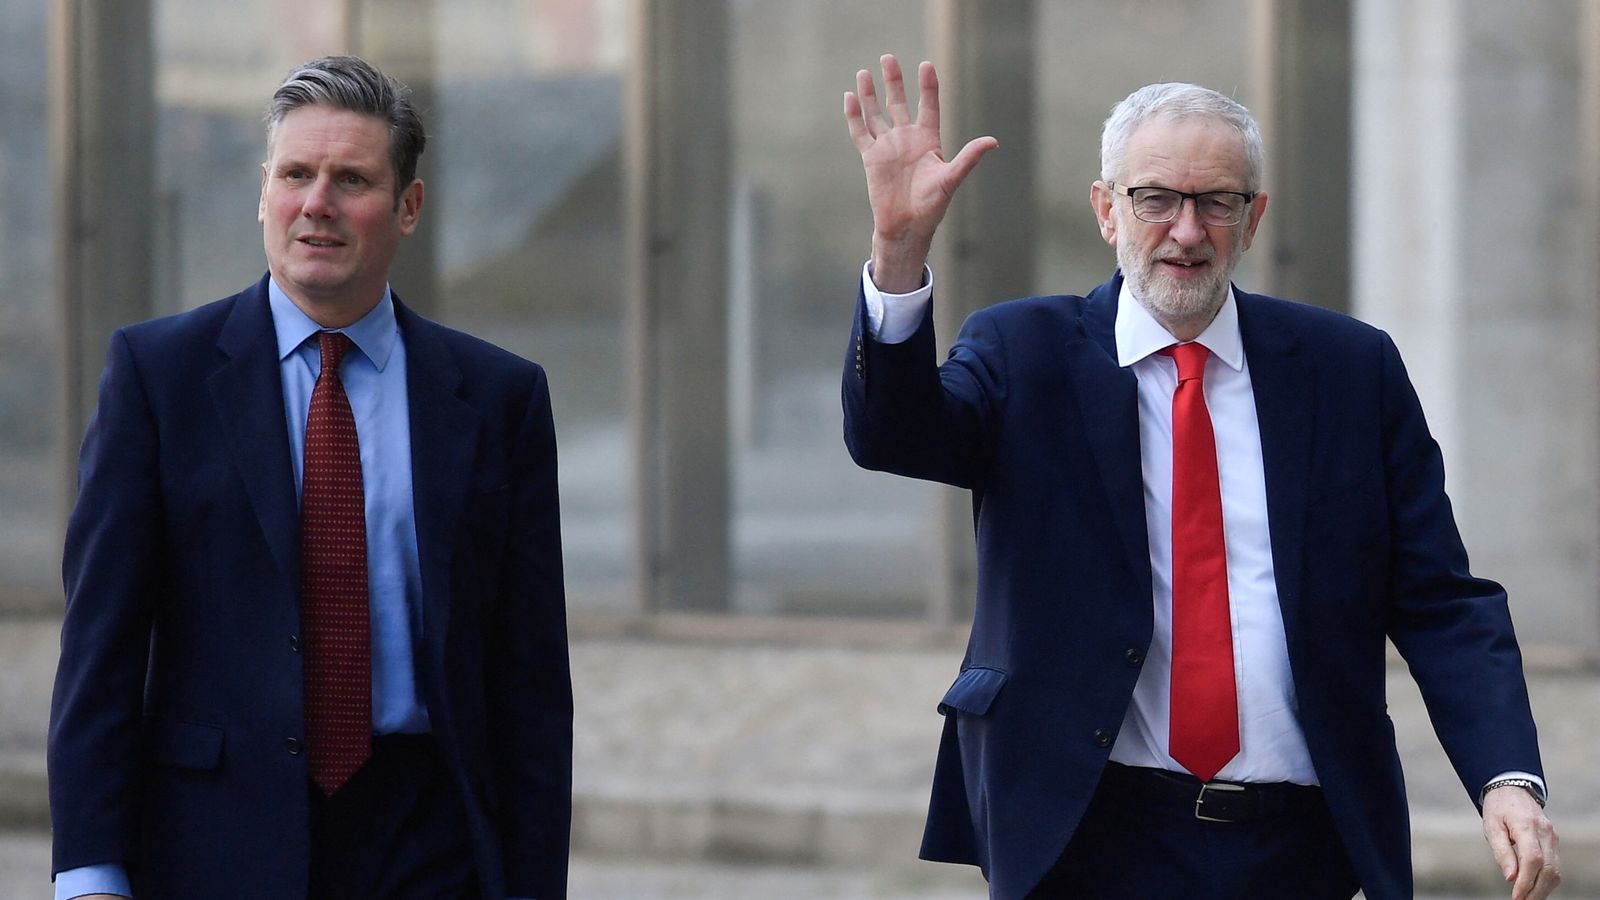 Jeremy Corbyn accuses Sir Keir Starmer of 'flagrant attack' on his future as an MP